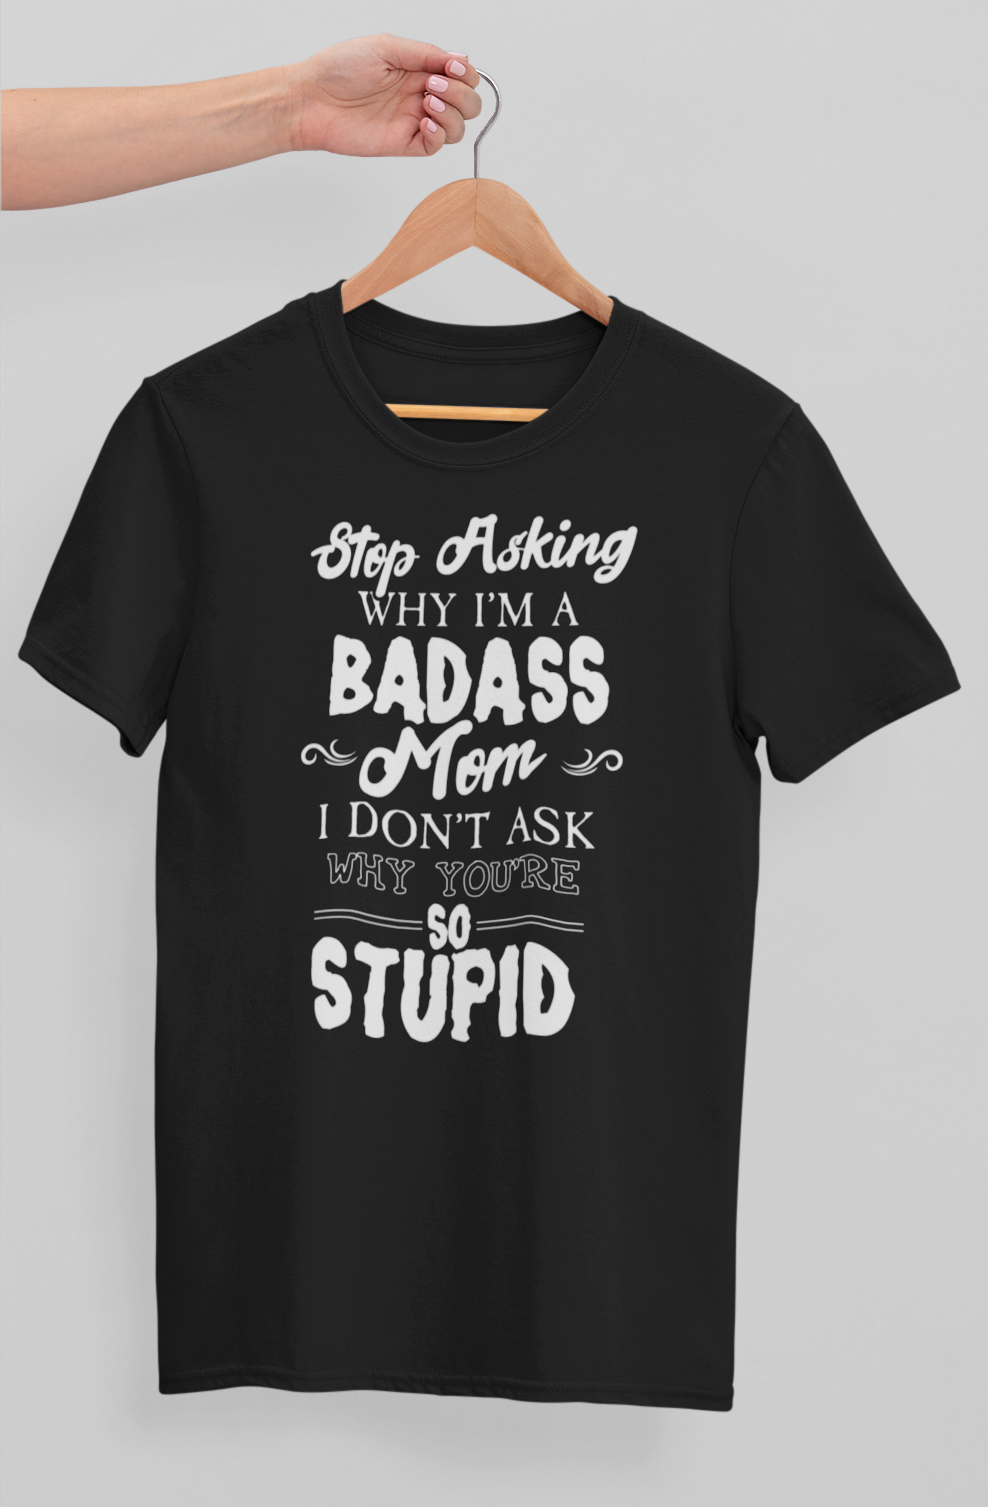 Stop Asking Why I'm A Badass Mom T-shirt